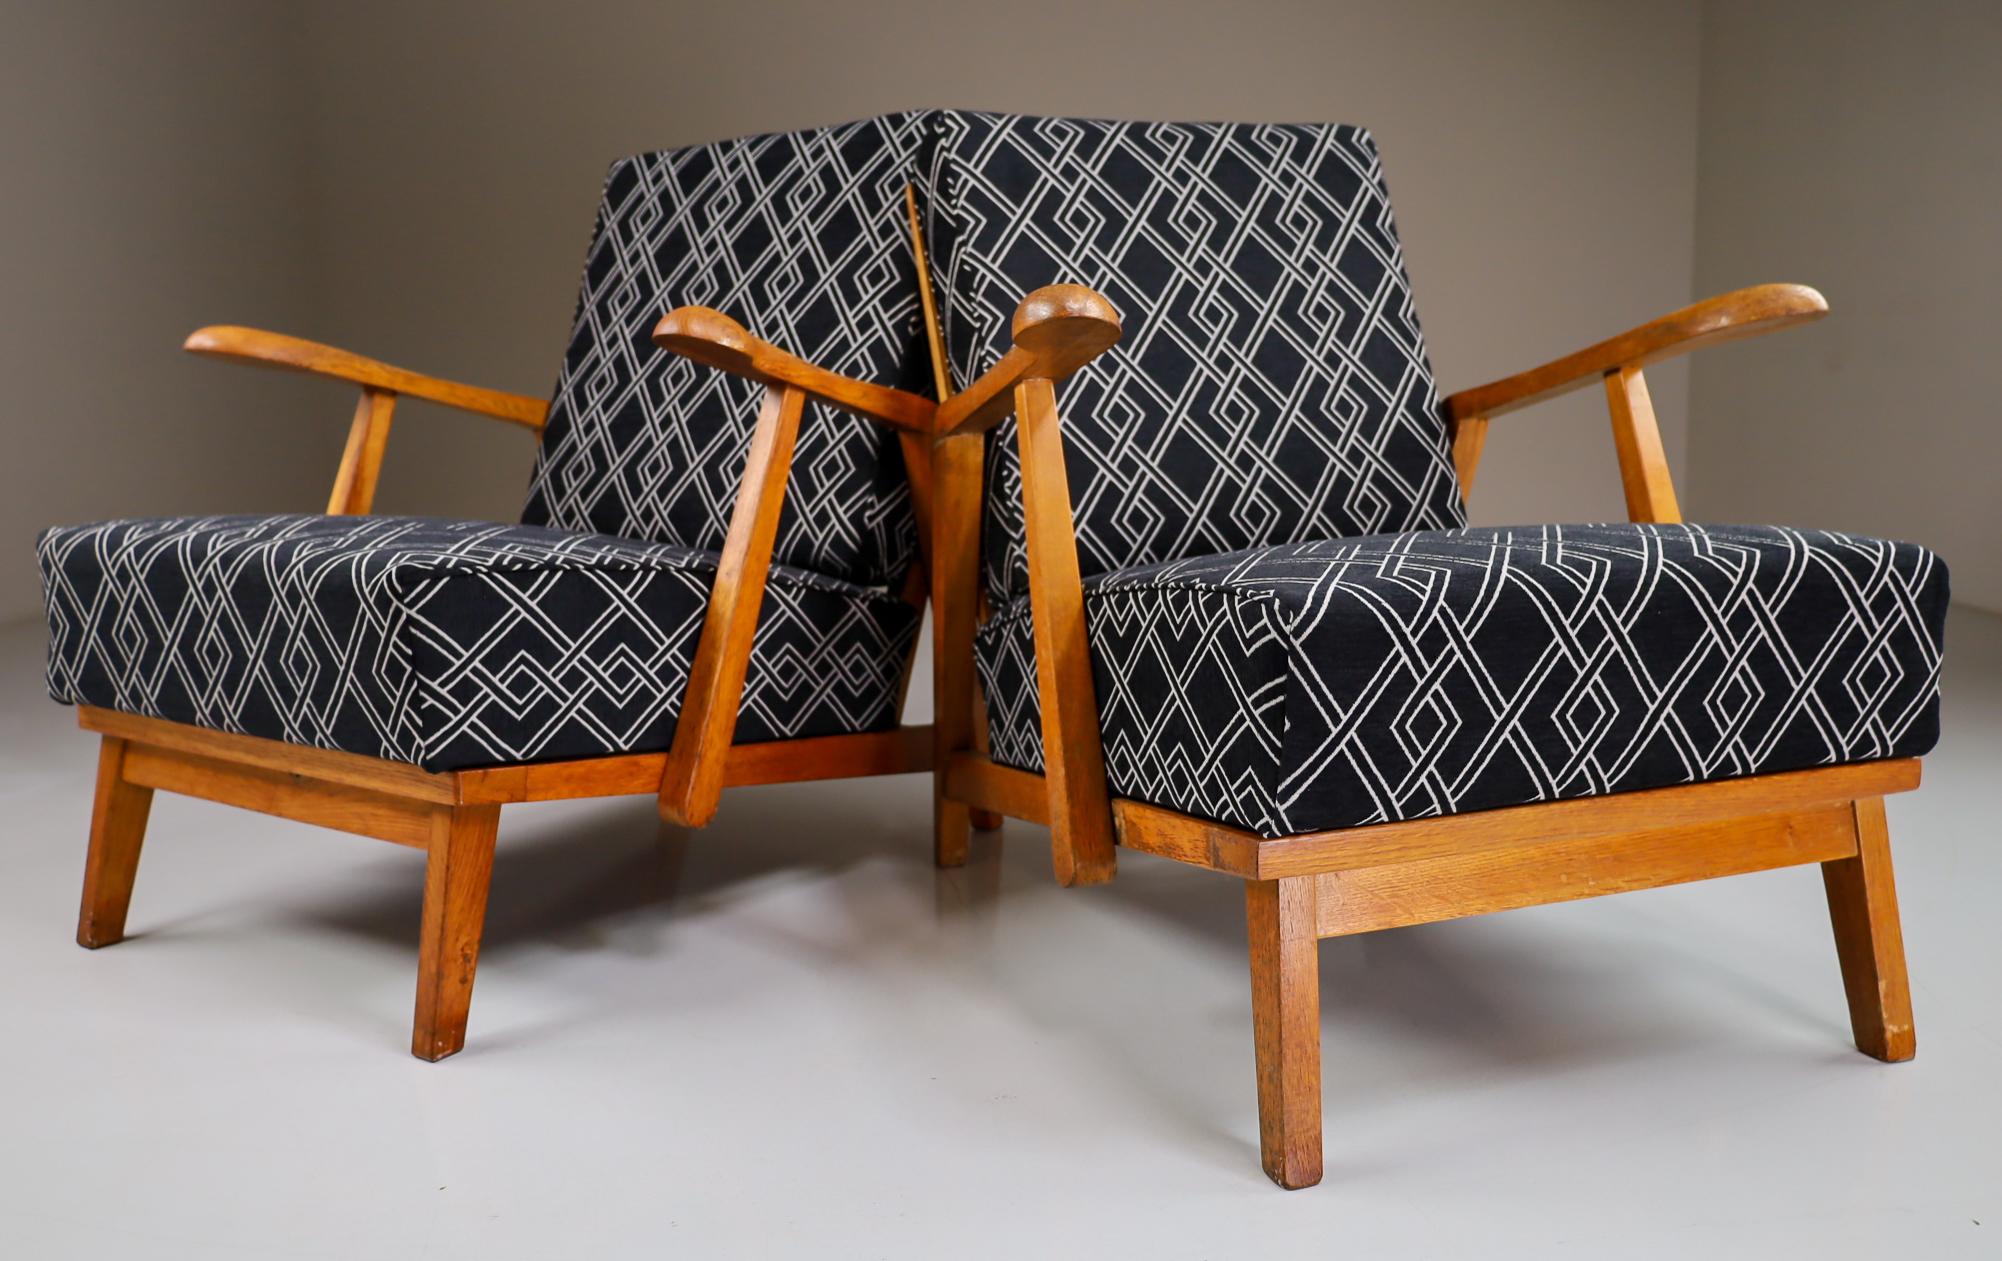 Pair of two original midcentury sculptural armchairs or lounge chairs manufactured and designed in France 1950s. Made of solid oak and professionally reupholstered. These armchairs would make an eye-catching addition to any interior such as living